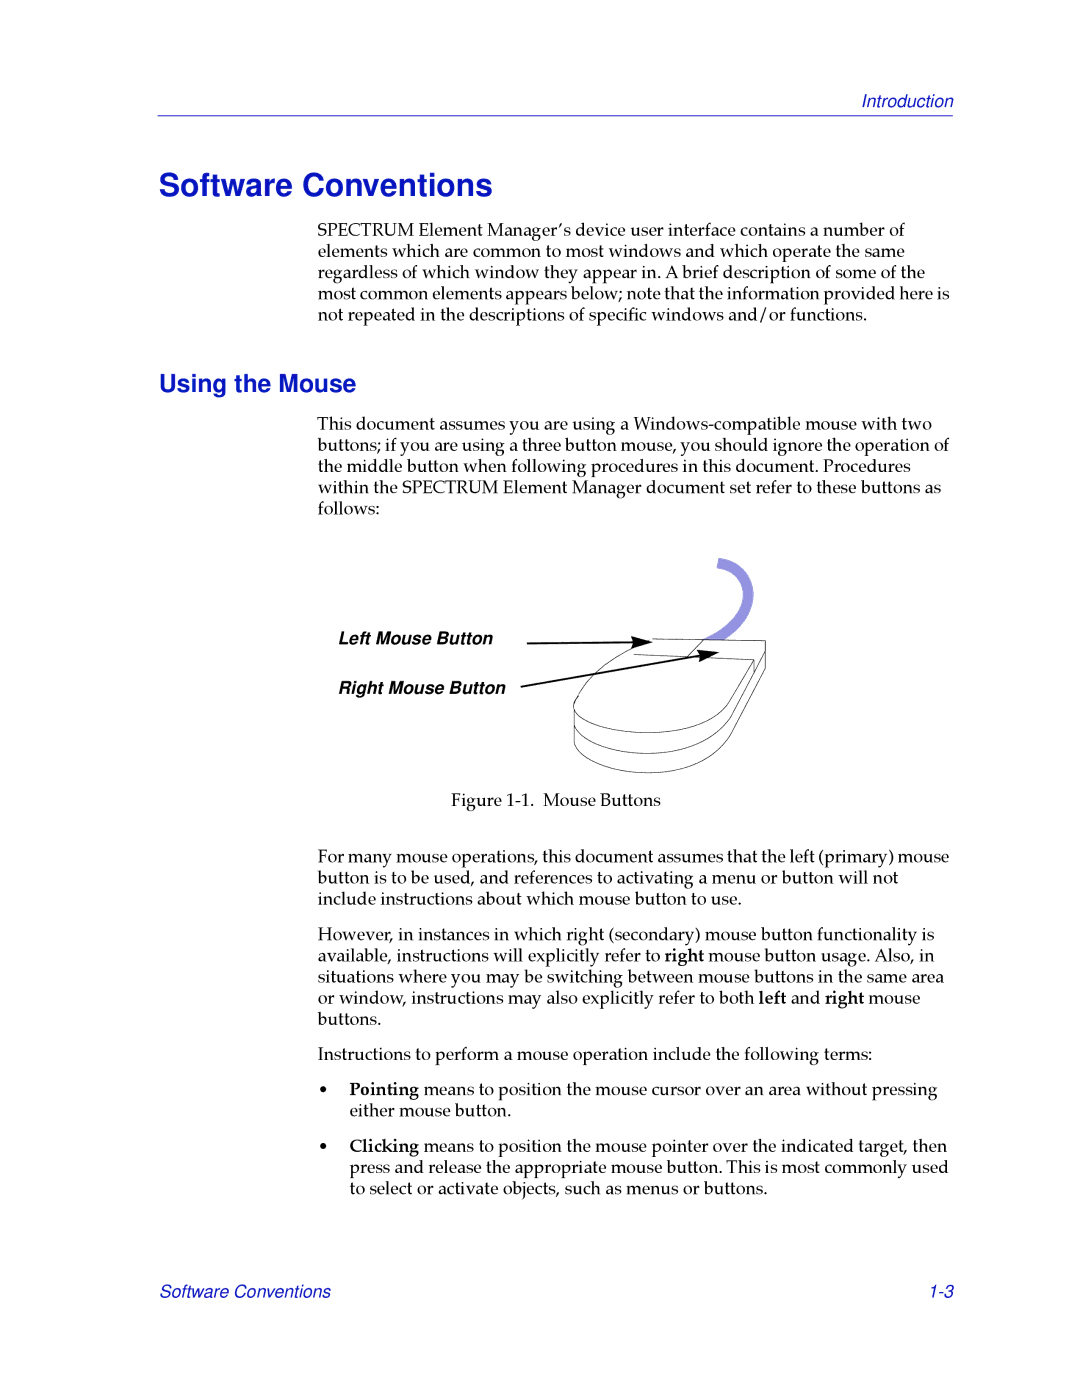 Cabletron Systems NB30 manual Software Conventions, Using the Mouse 